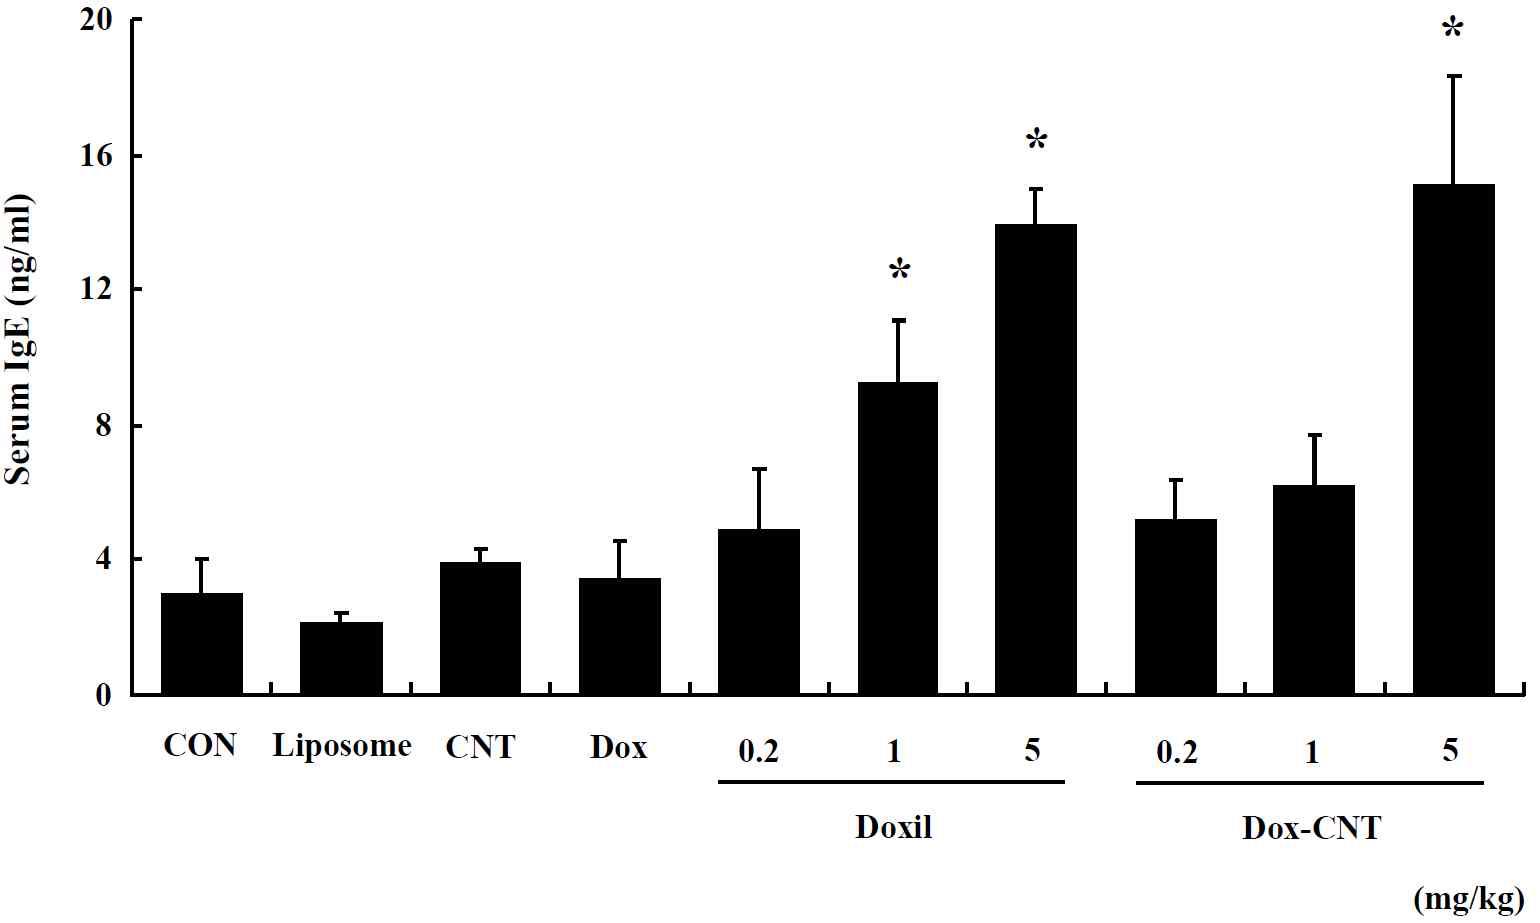 Serum IgE levels in single exposed female ICR mice for 14 days. Mice were respectively administered by intravenous injection with liposome, CNT, Dox, Doxil (0.2, 1, 5 mg/kg) and Dox-CNT (0.2, 1, 5 mg/kg). The results are presented as mean ± SE (n = 10). * p < 0.05, significantly different from the control.